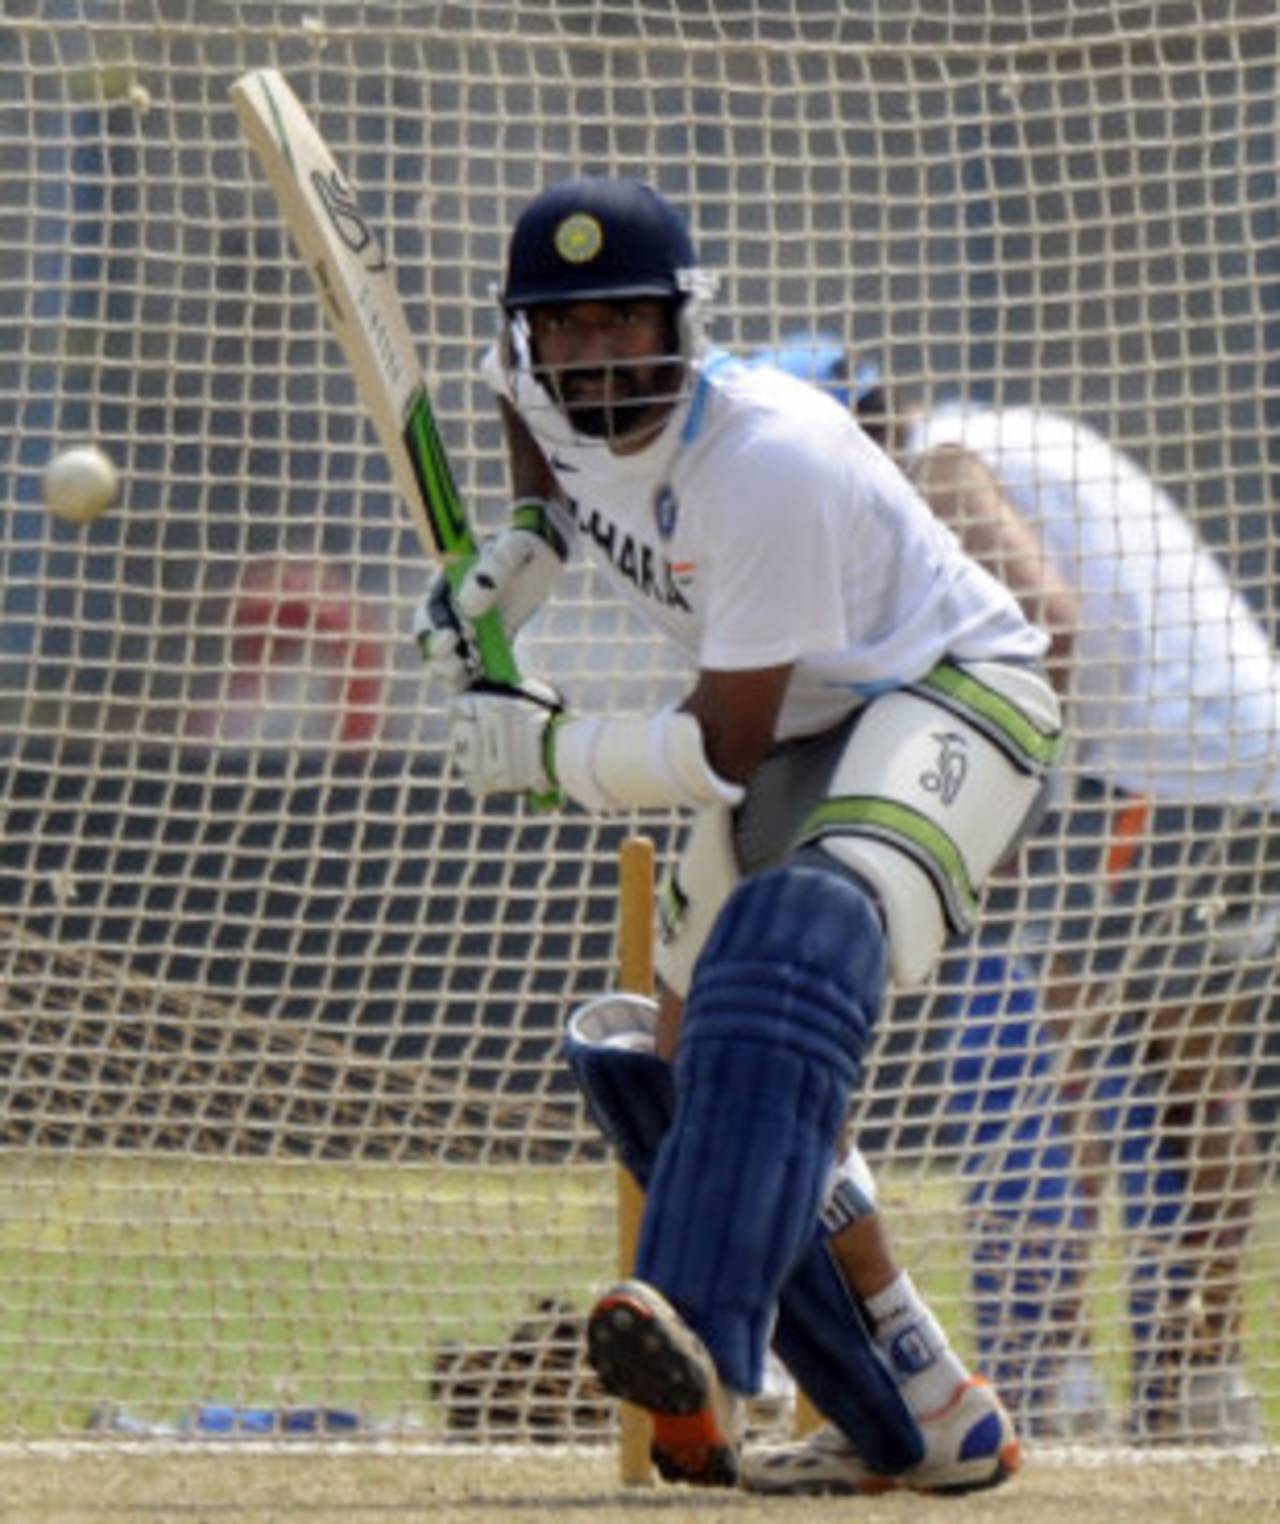 Robin Uthappa has a net on his return to the Indian side, Kolkata, October 28, 2011